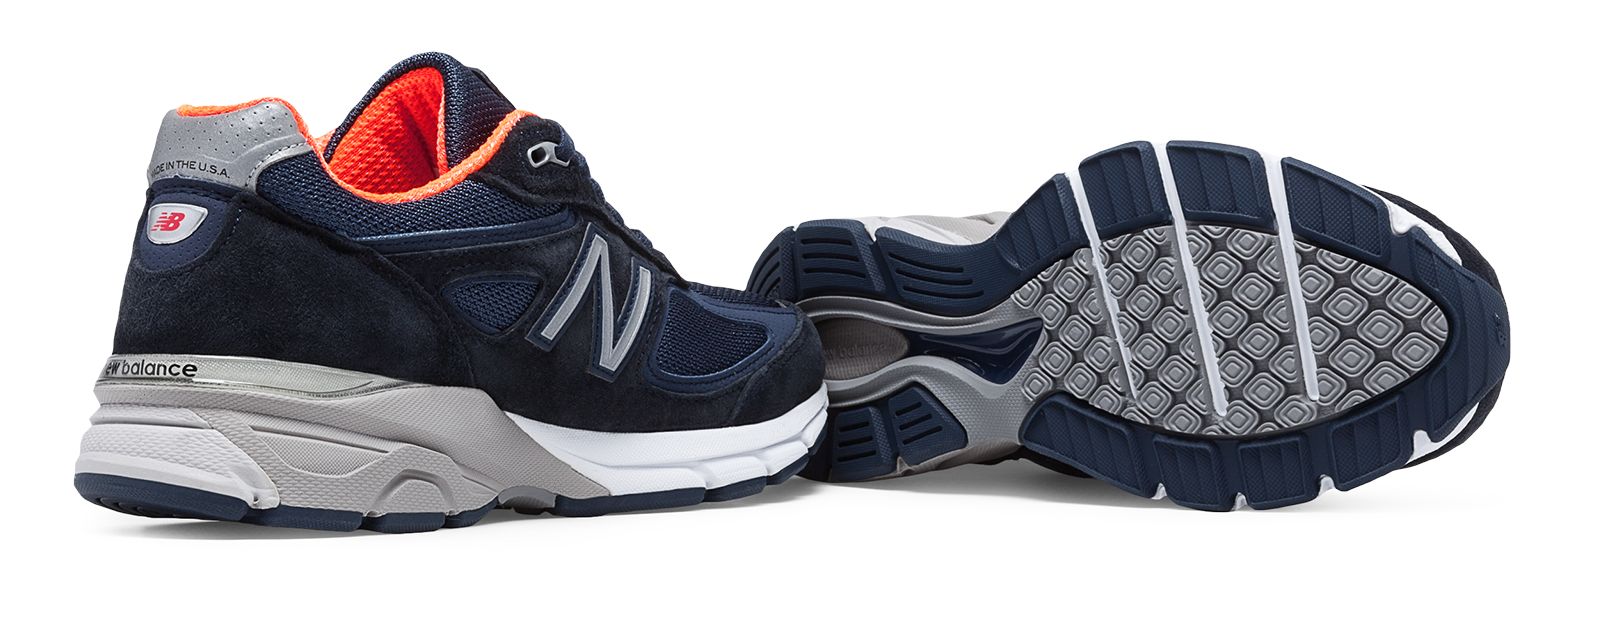 New Balance W990-V4 on Sale - Discounts Up to 57% Off on W990NV4 at Joe's New  Balance Outlet